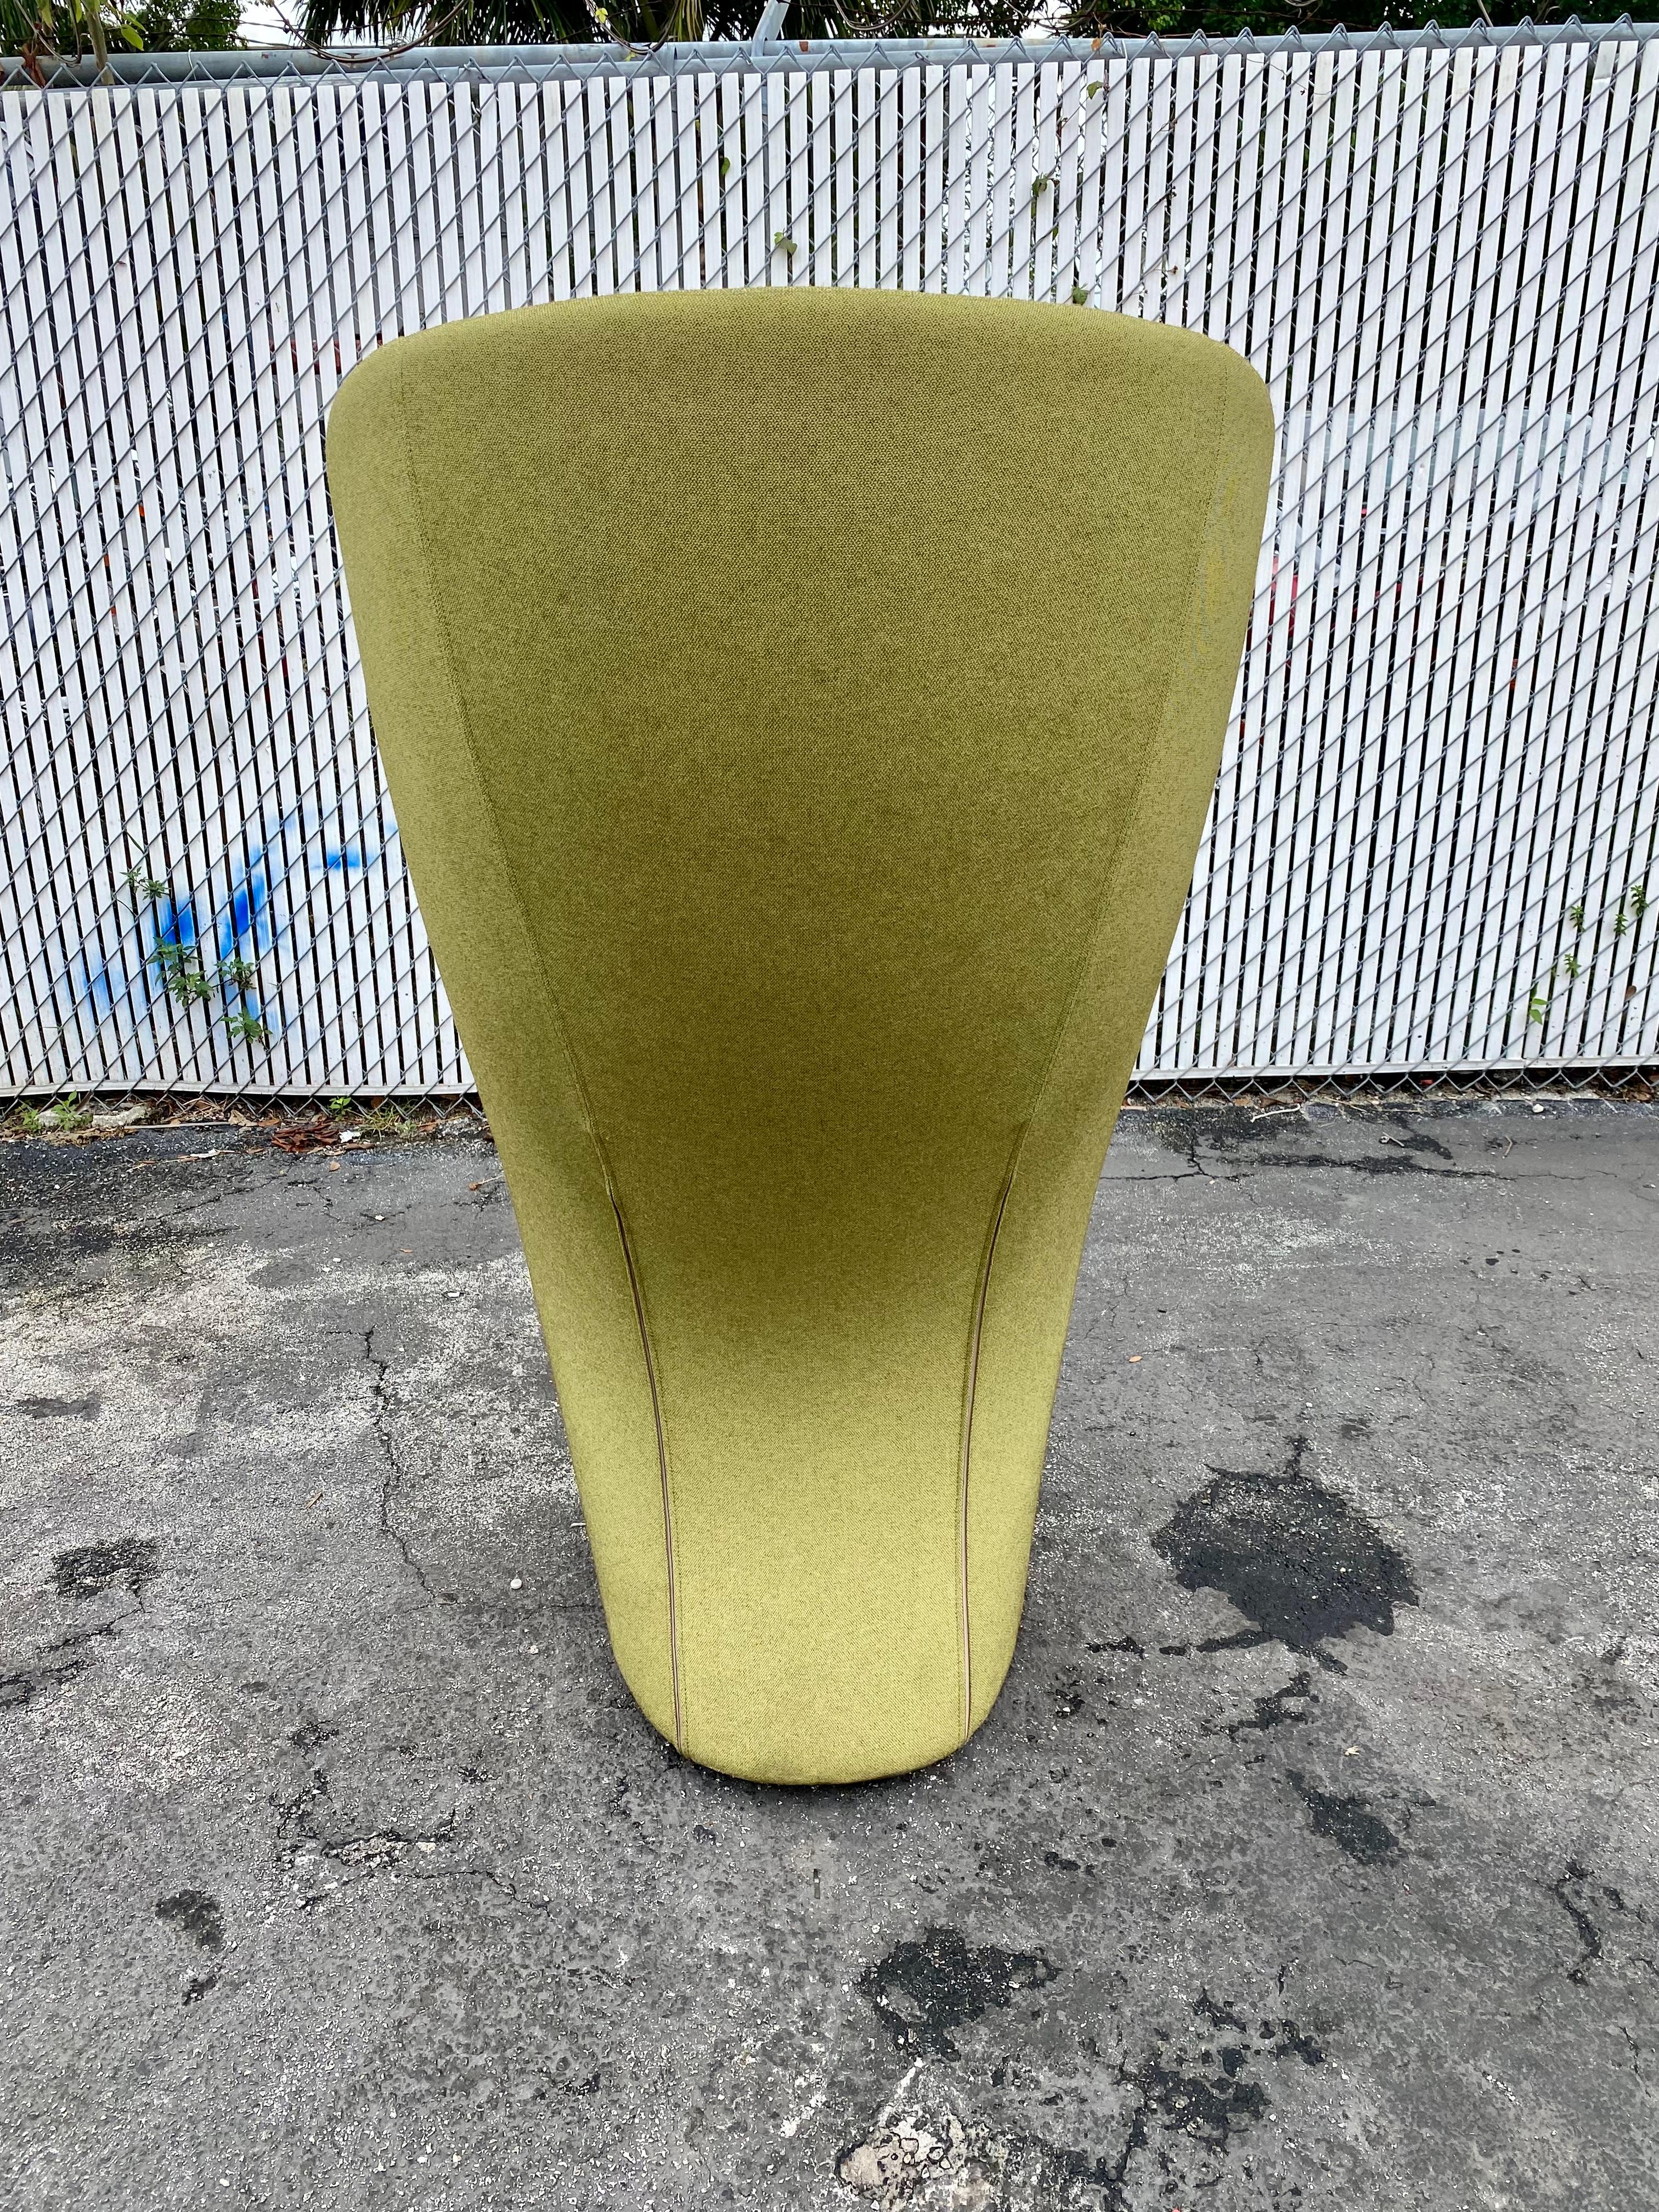 Monumental Hightower Shelter Sculptural Swivel Chair In Good Condition For Sale In Fort Lauderdale, FL